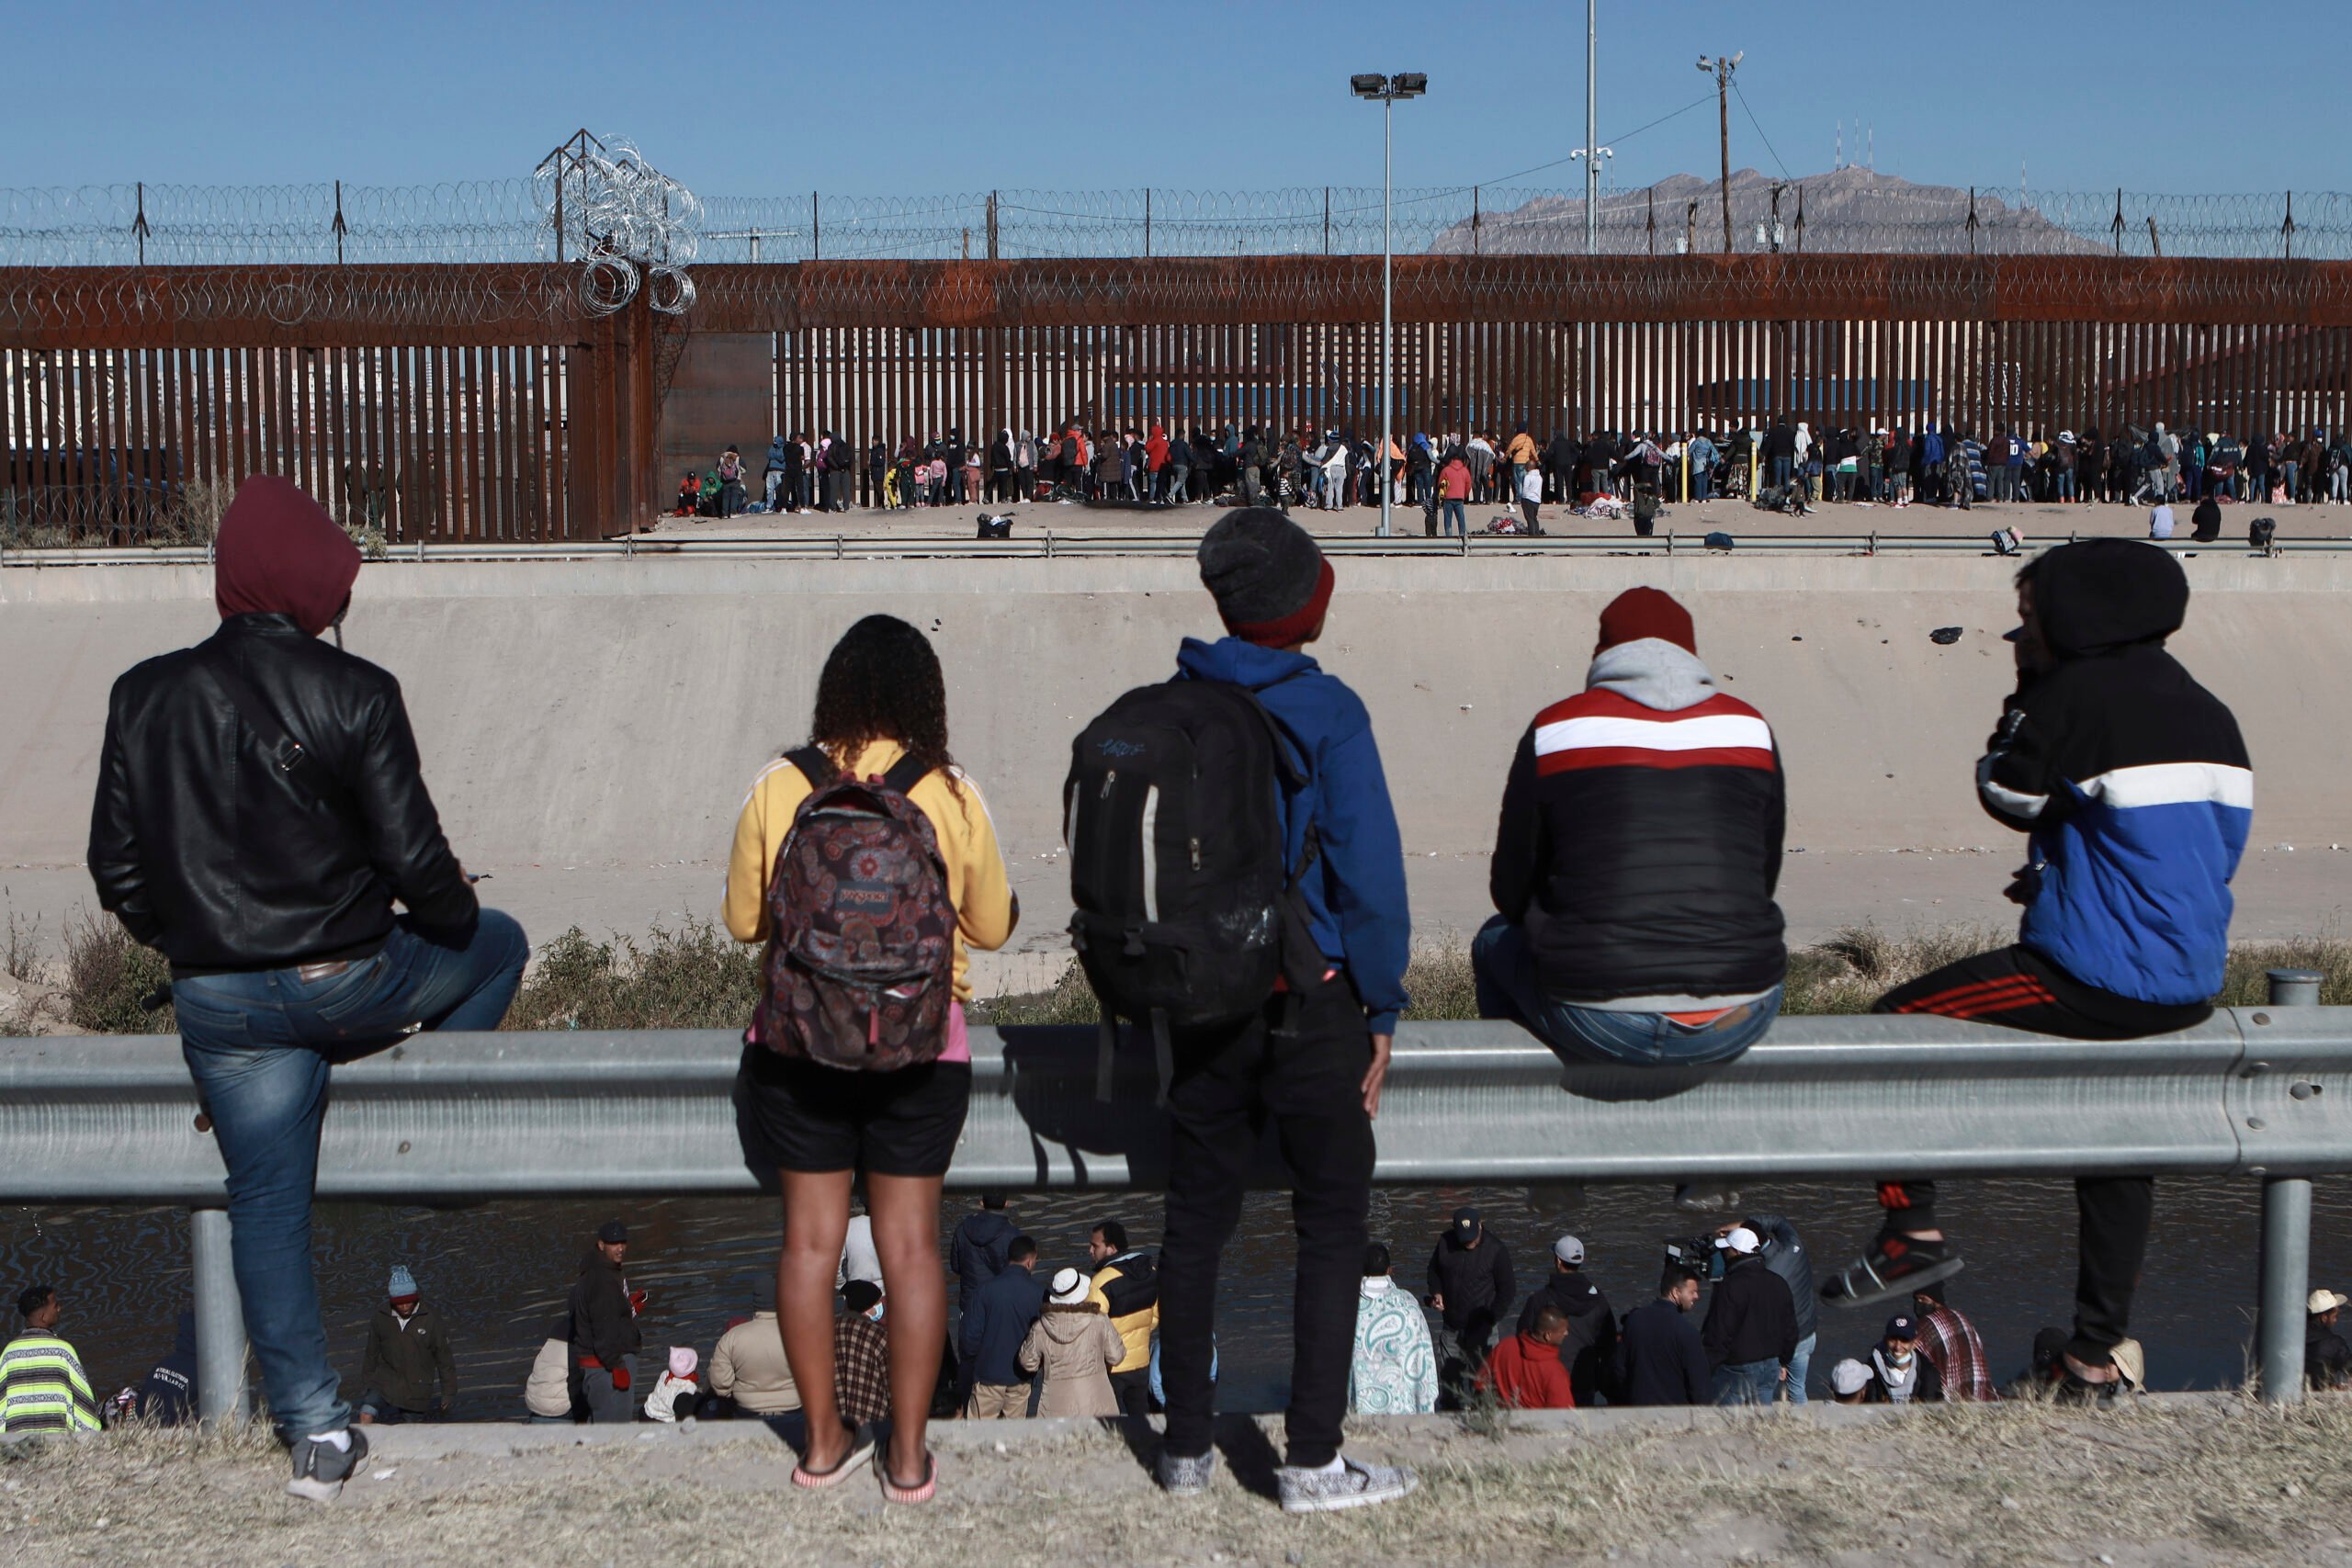 Migrants watch others stand next to the border wall in Ciudad Juarez, Mexico.